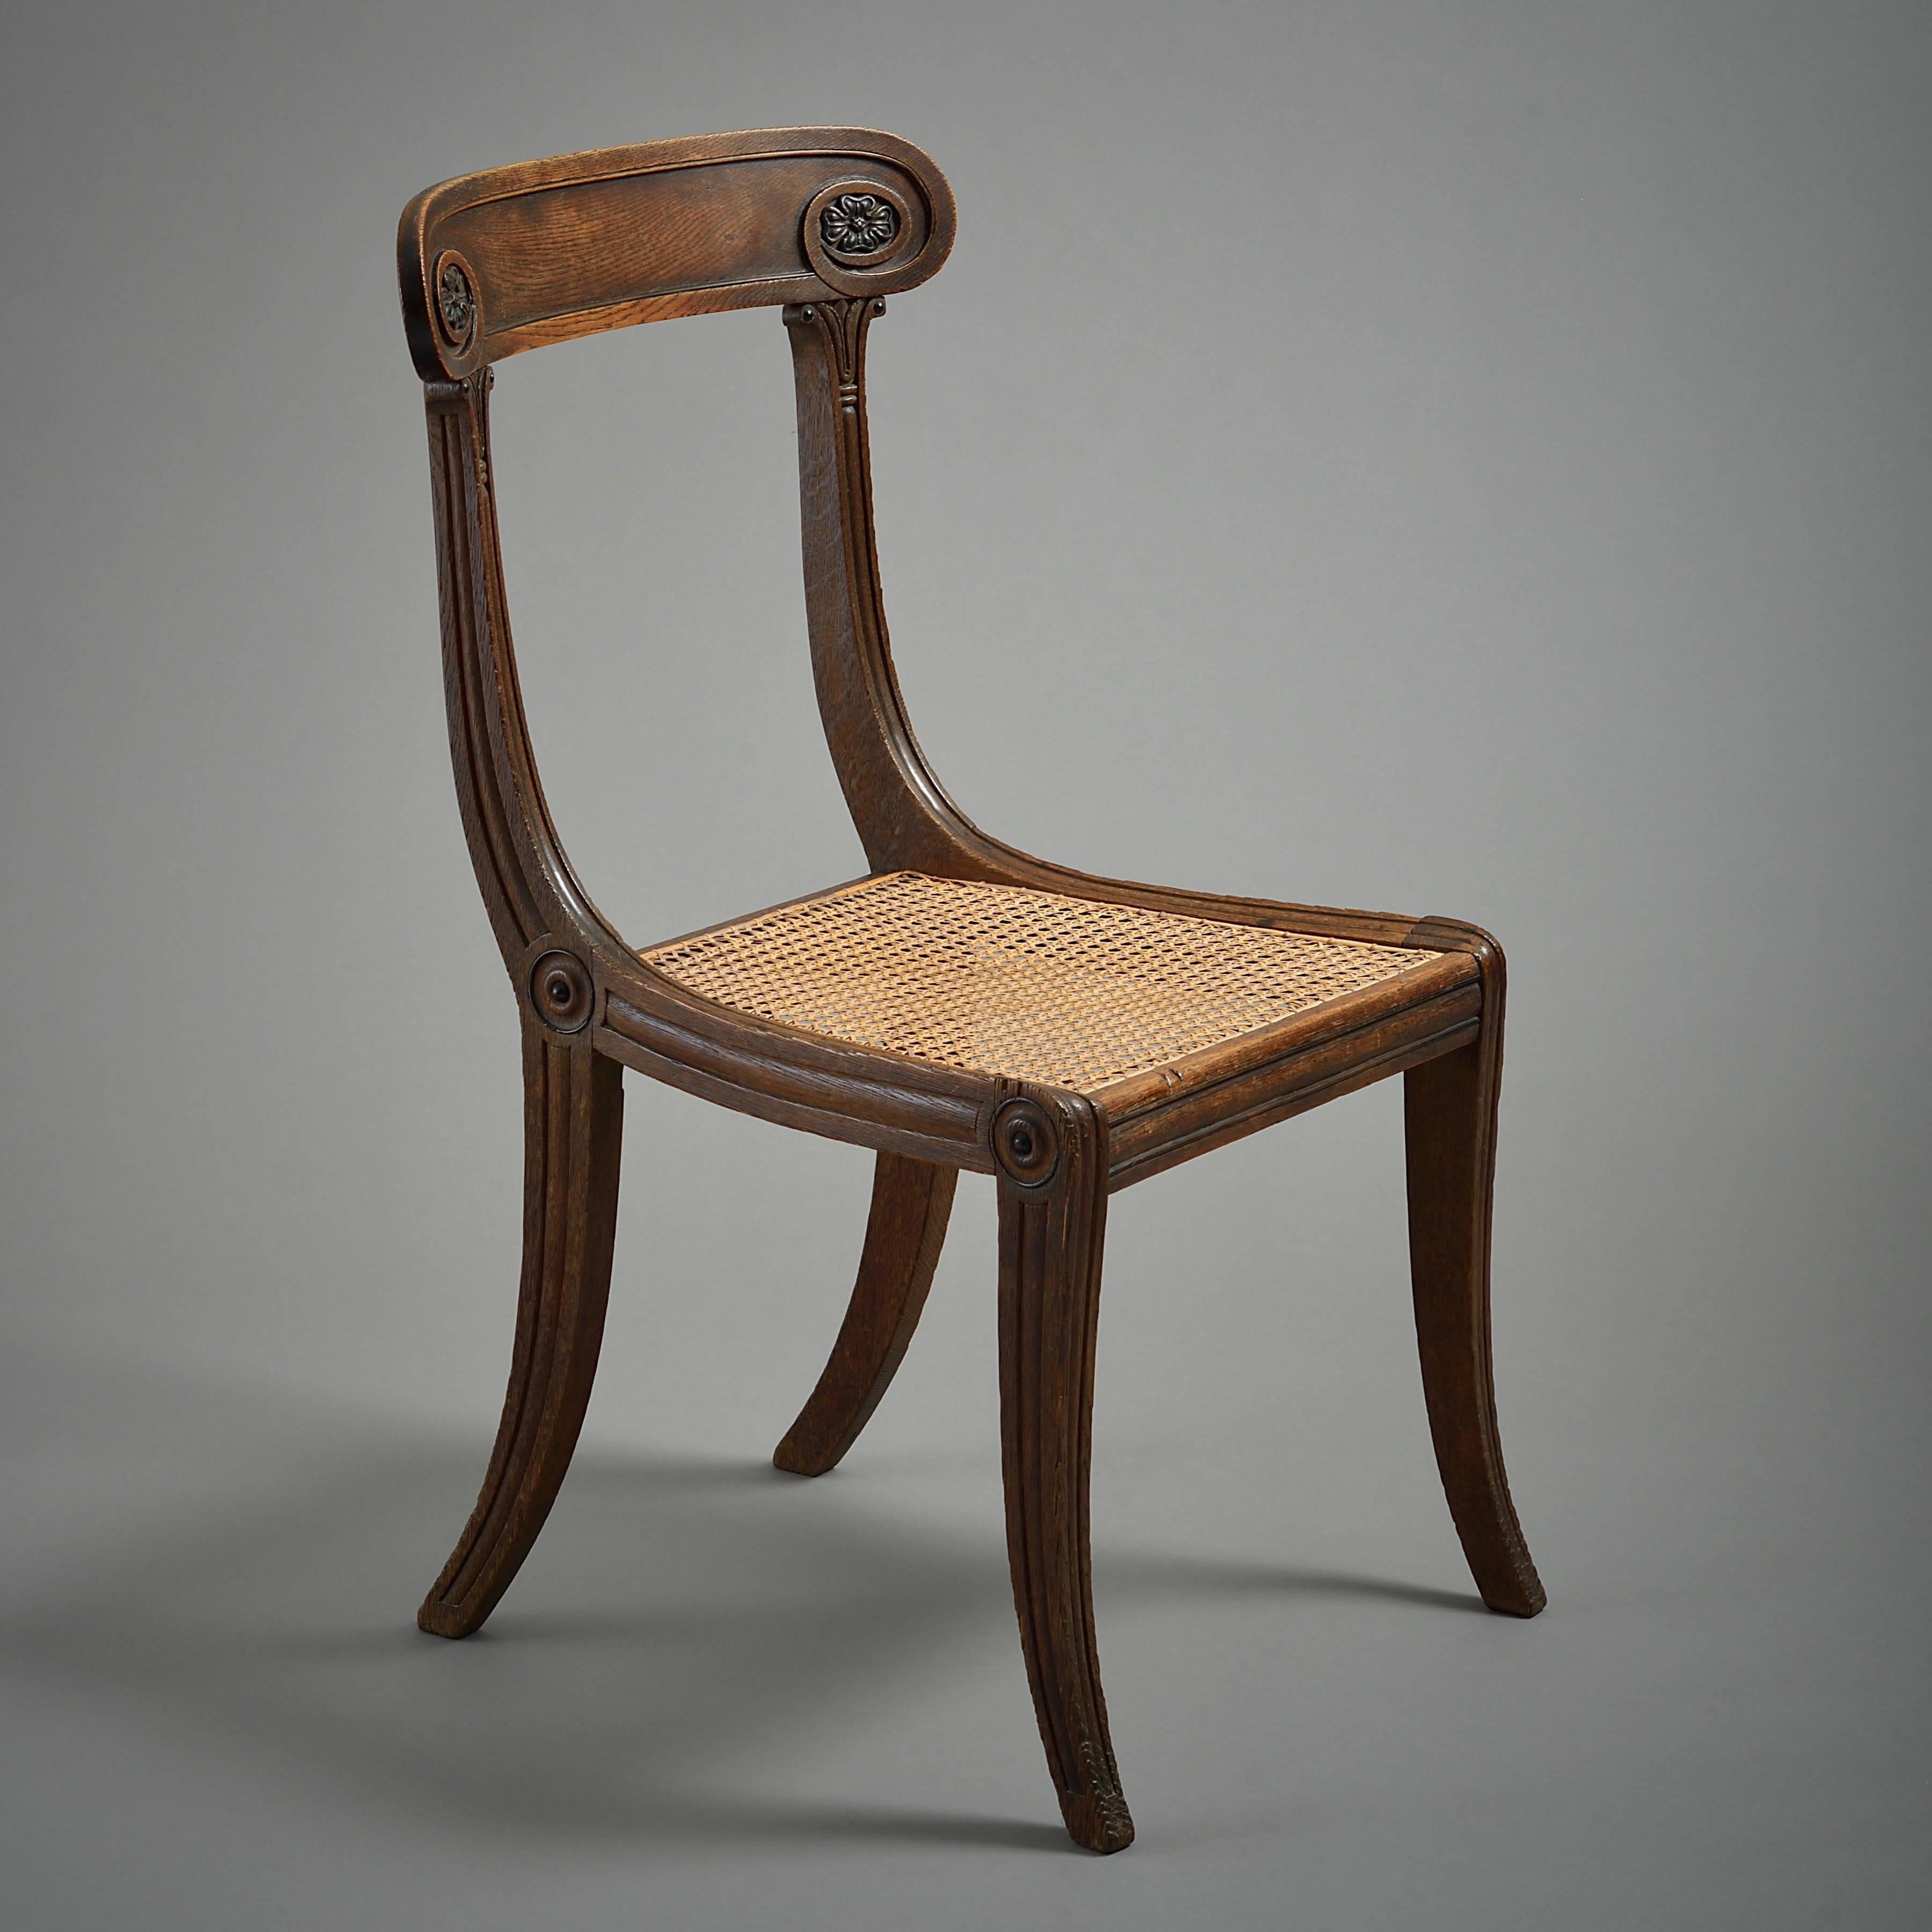 A Regency oak and ebonized chair with caned seat, circa 1810.